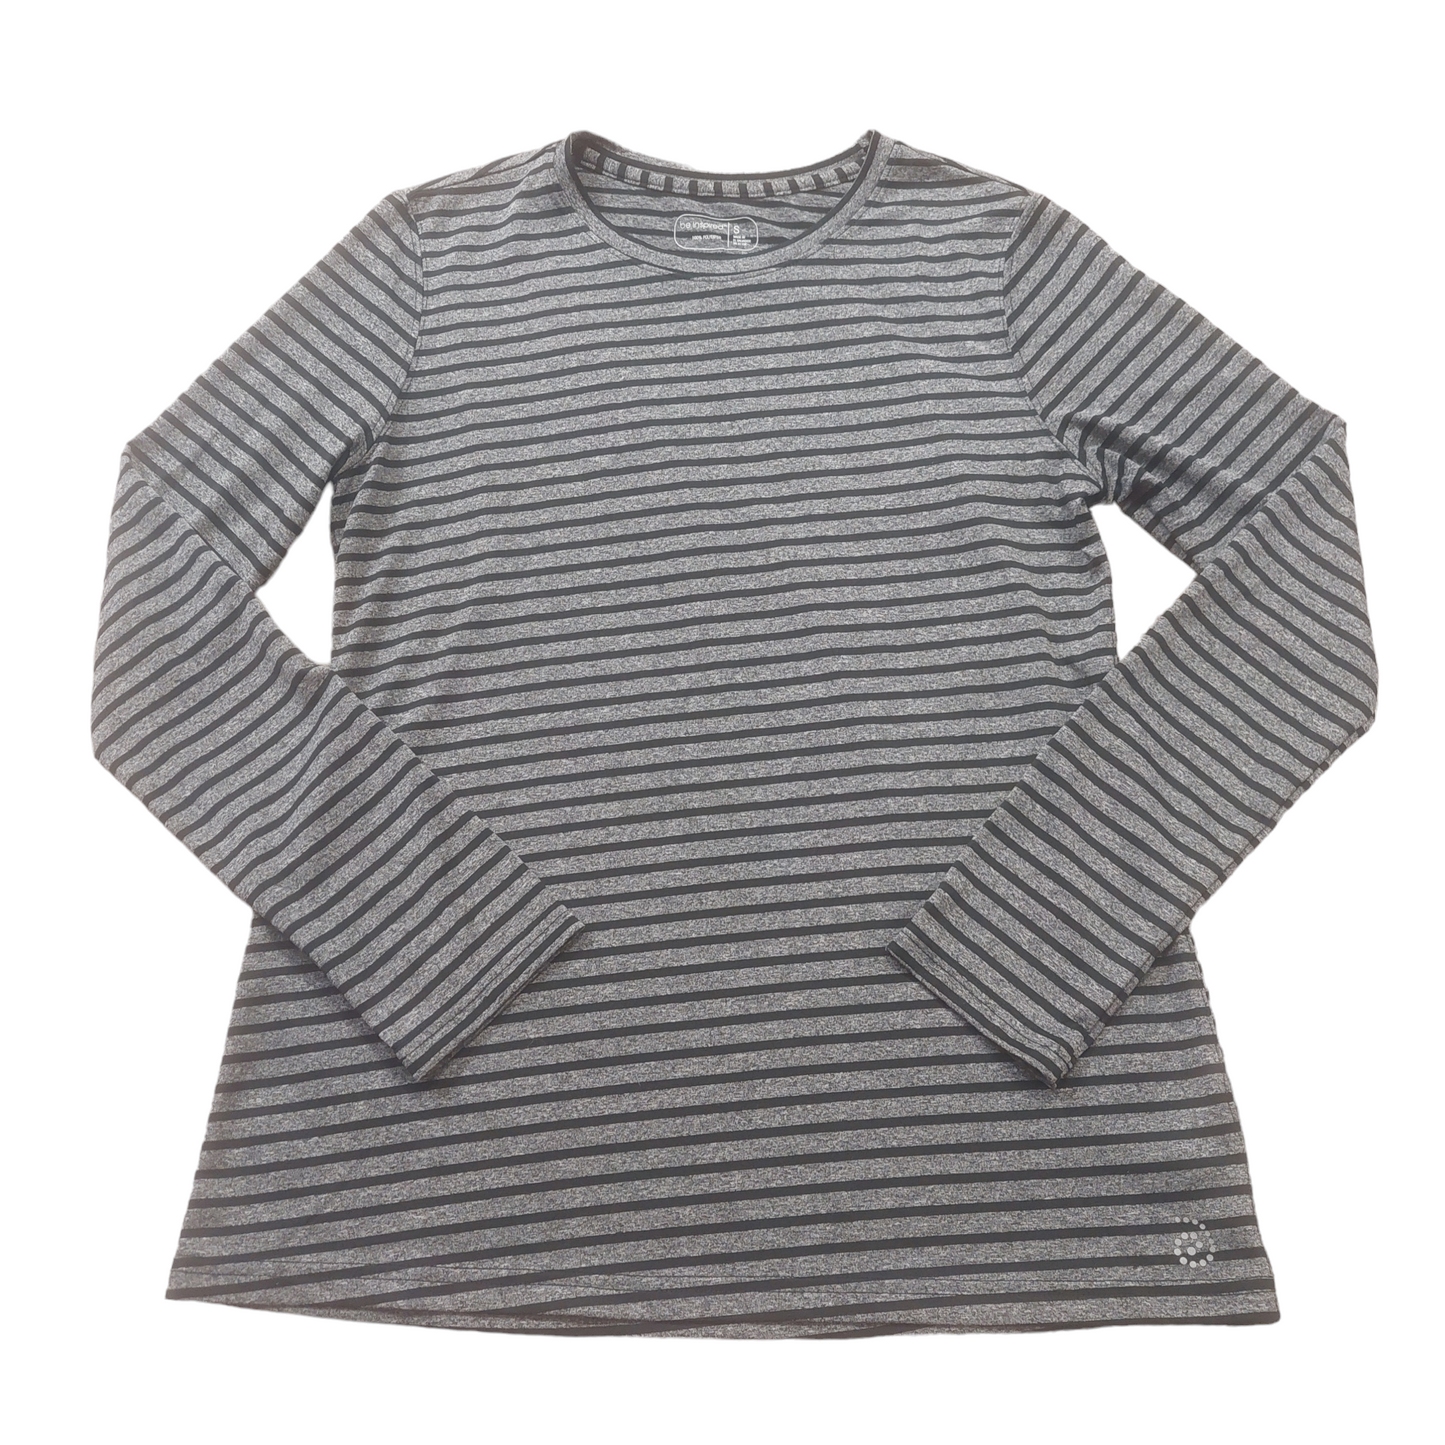 Striped Top Long Sleeve Be Inspired, Size S